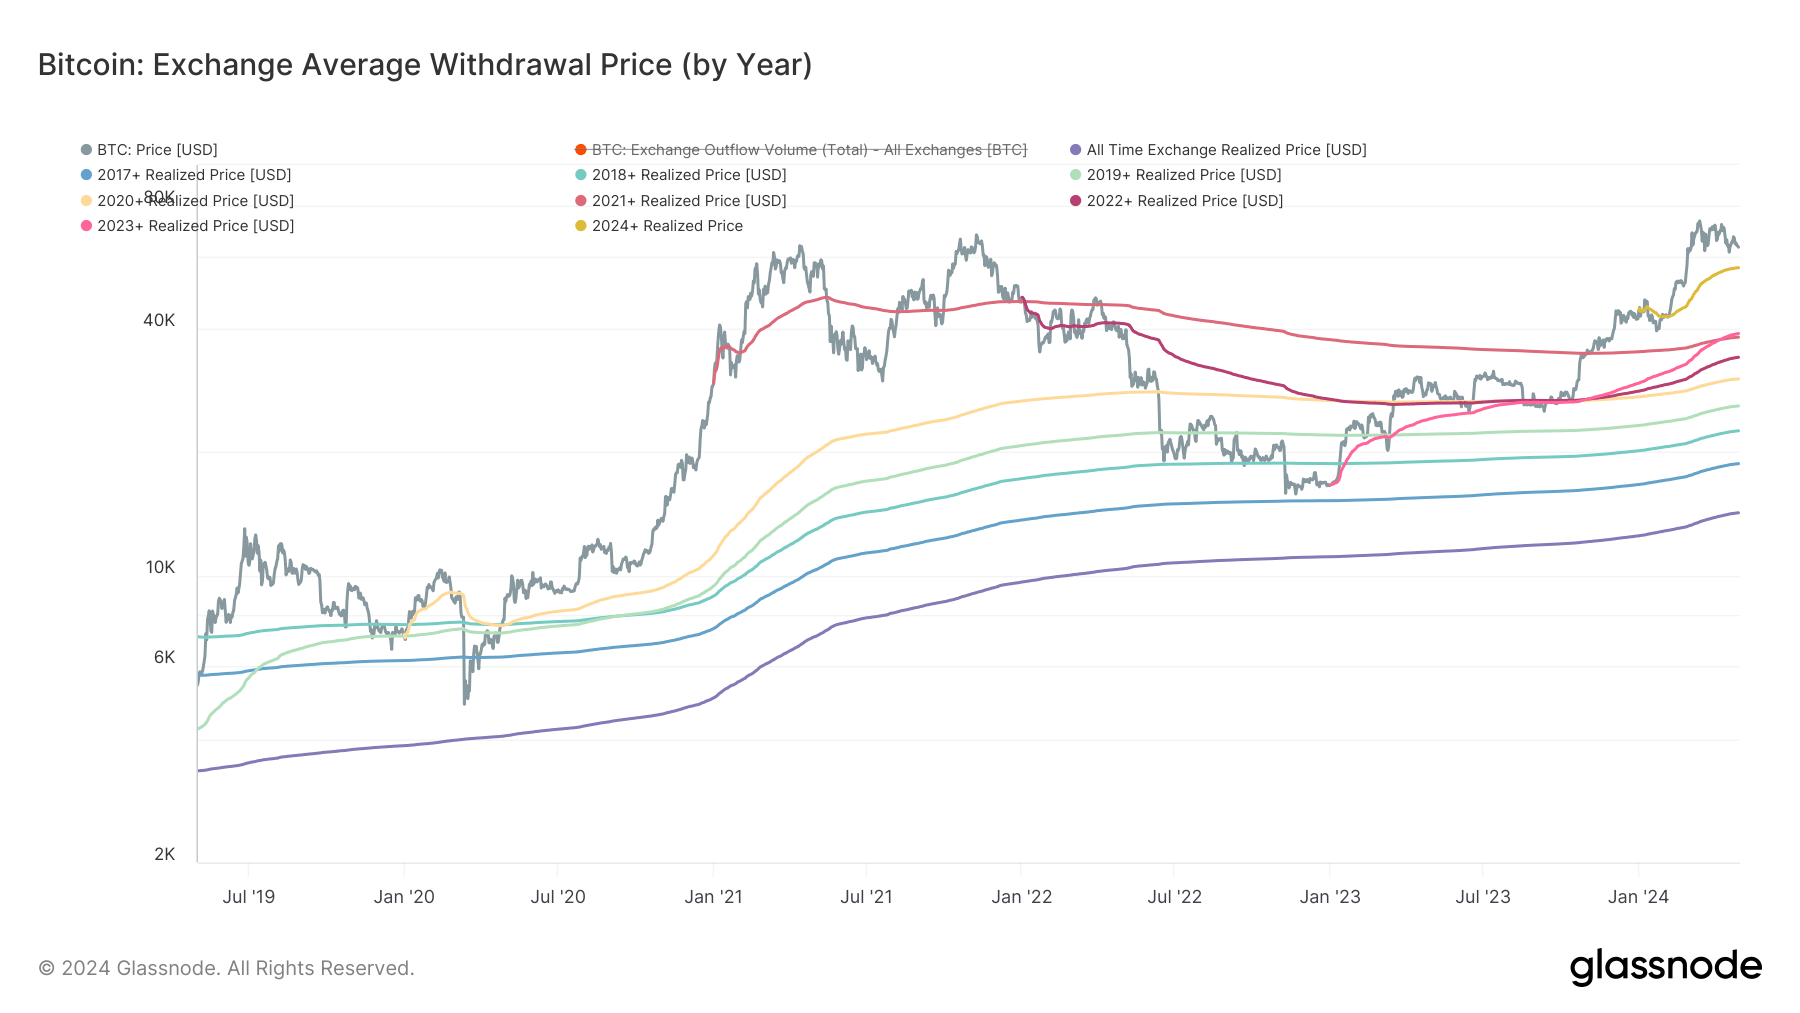 Exchange Average Withdrawal Price by year: (Source: Glassnode)